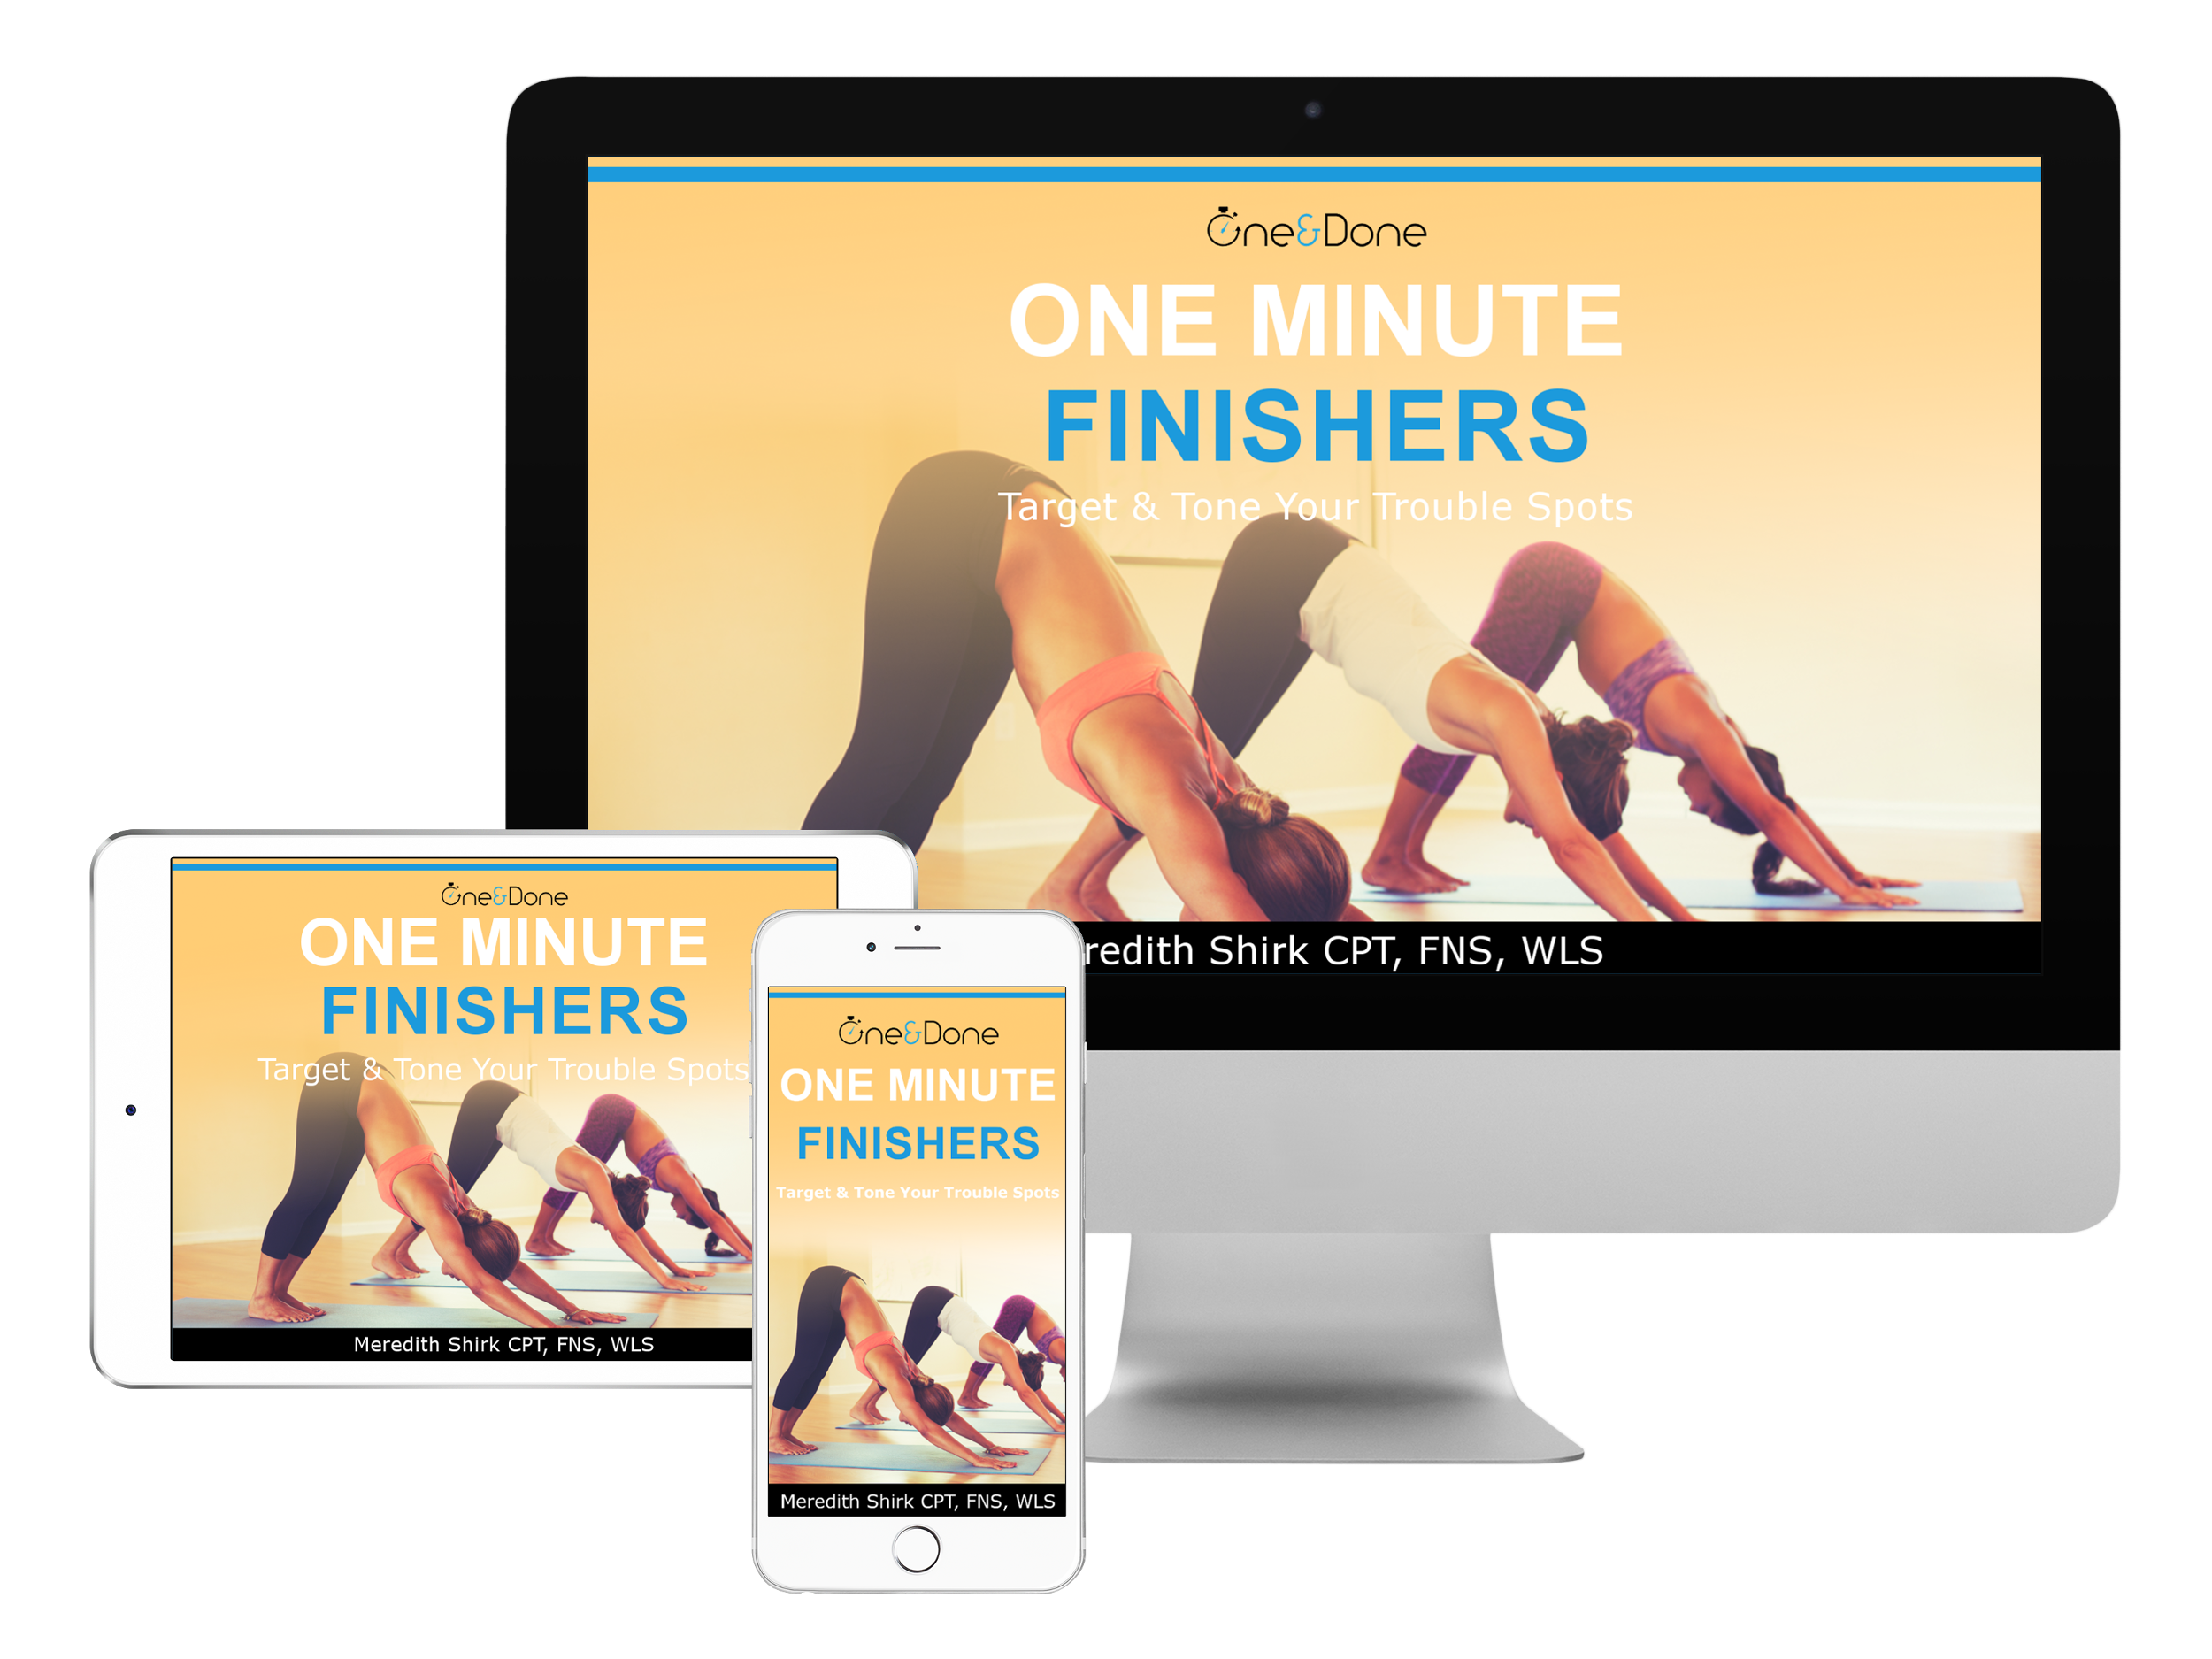 One Minute Finishers